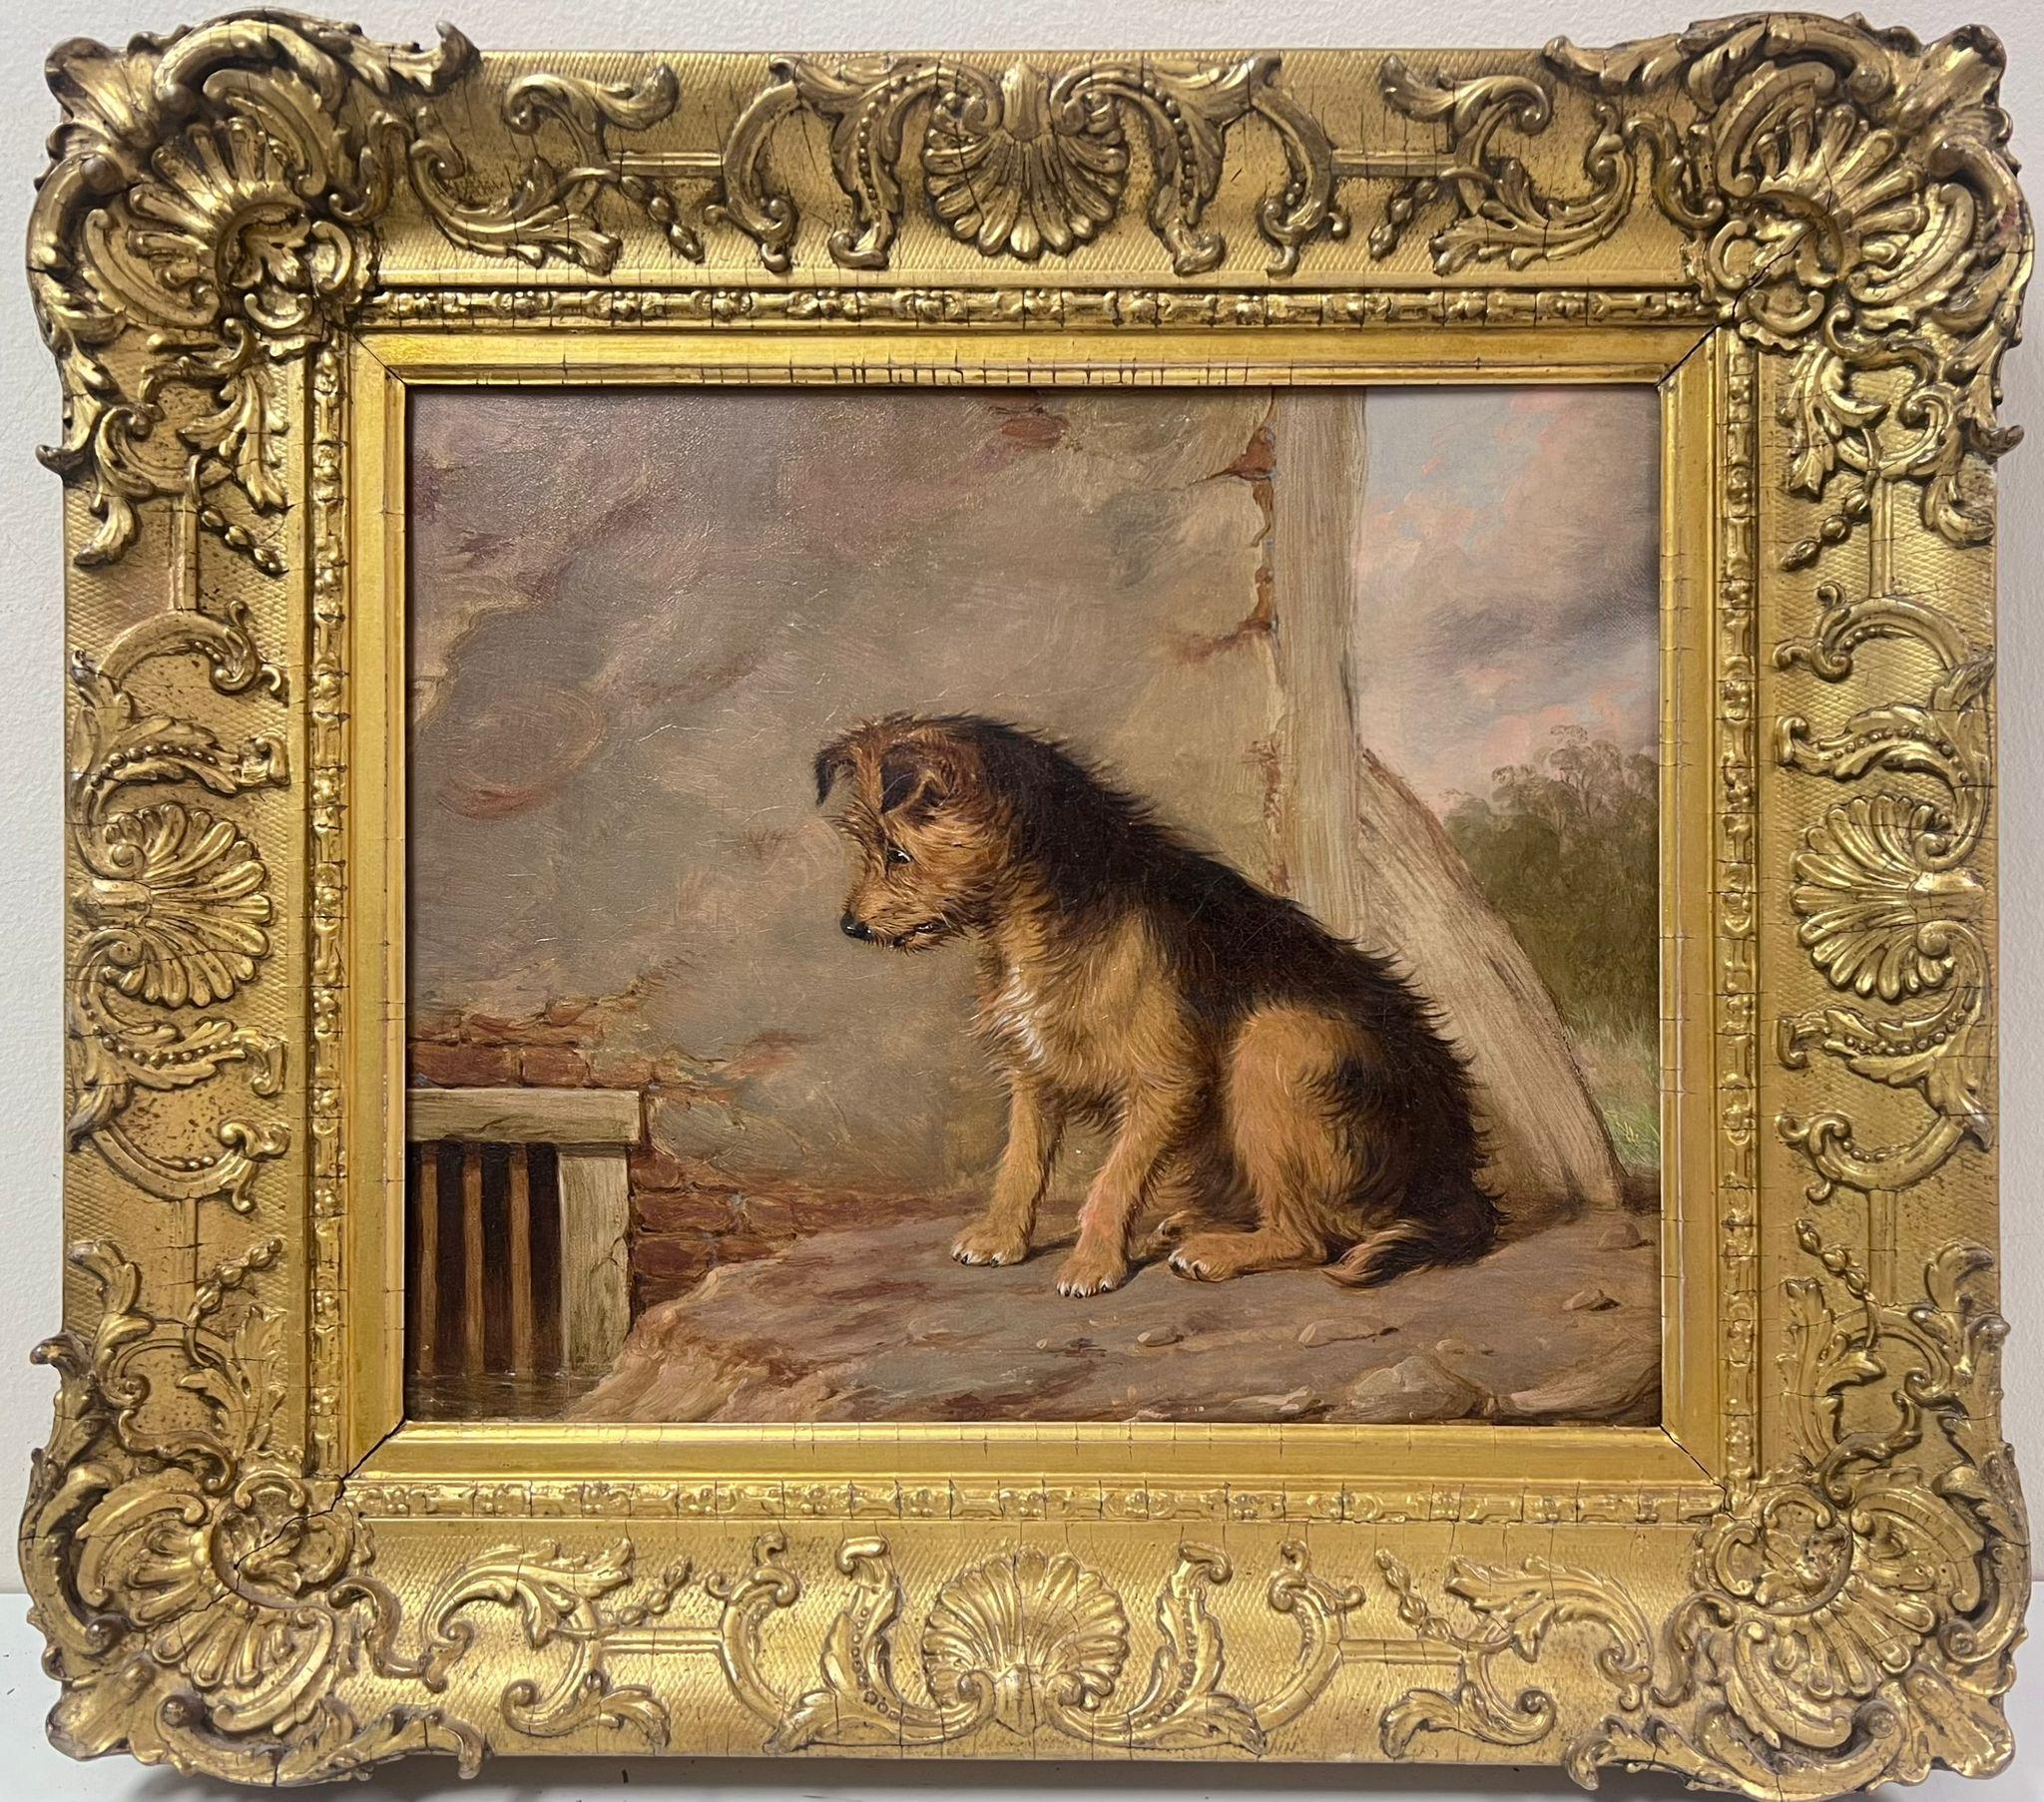 Martin Theodore Ward Portrait Painting - Fine Victorian Oil Painting Portrait of Scruffy Terrier Dog Staring in Gilt Frme